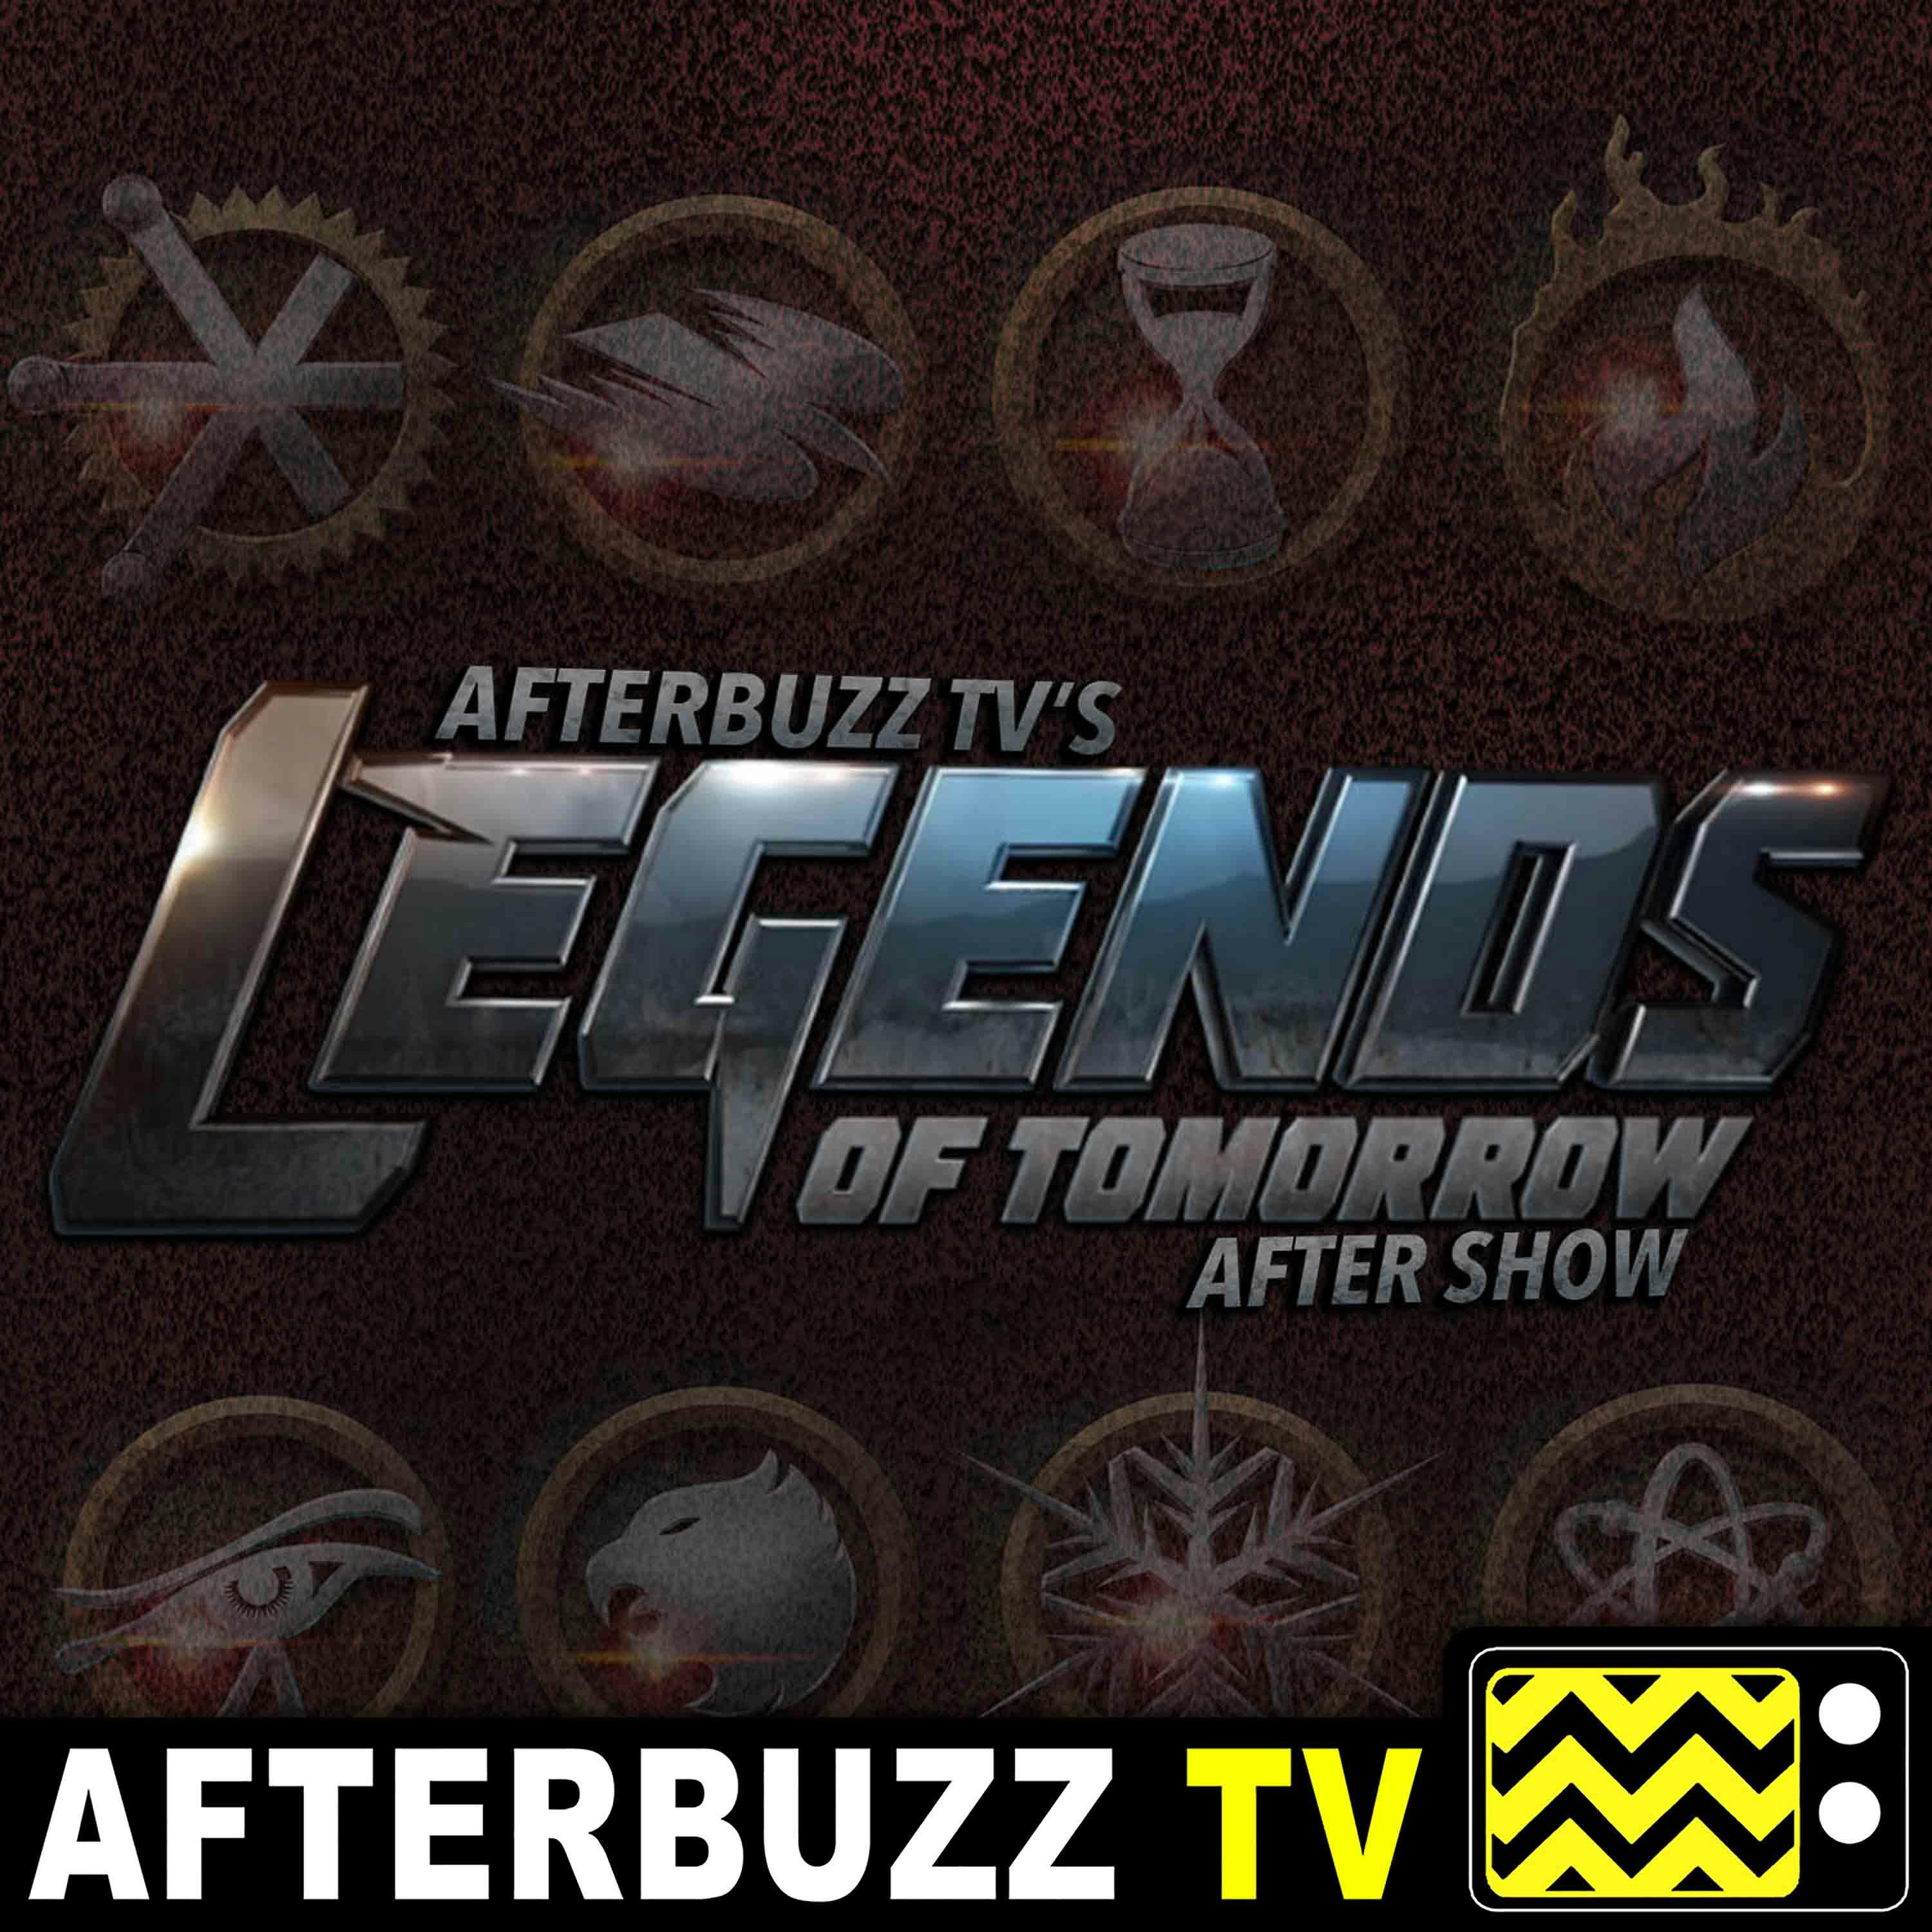 Legends Of Tomorrow S:1 | Marooned E:7 | AfterBuzz TV AfterShow